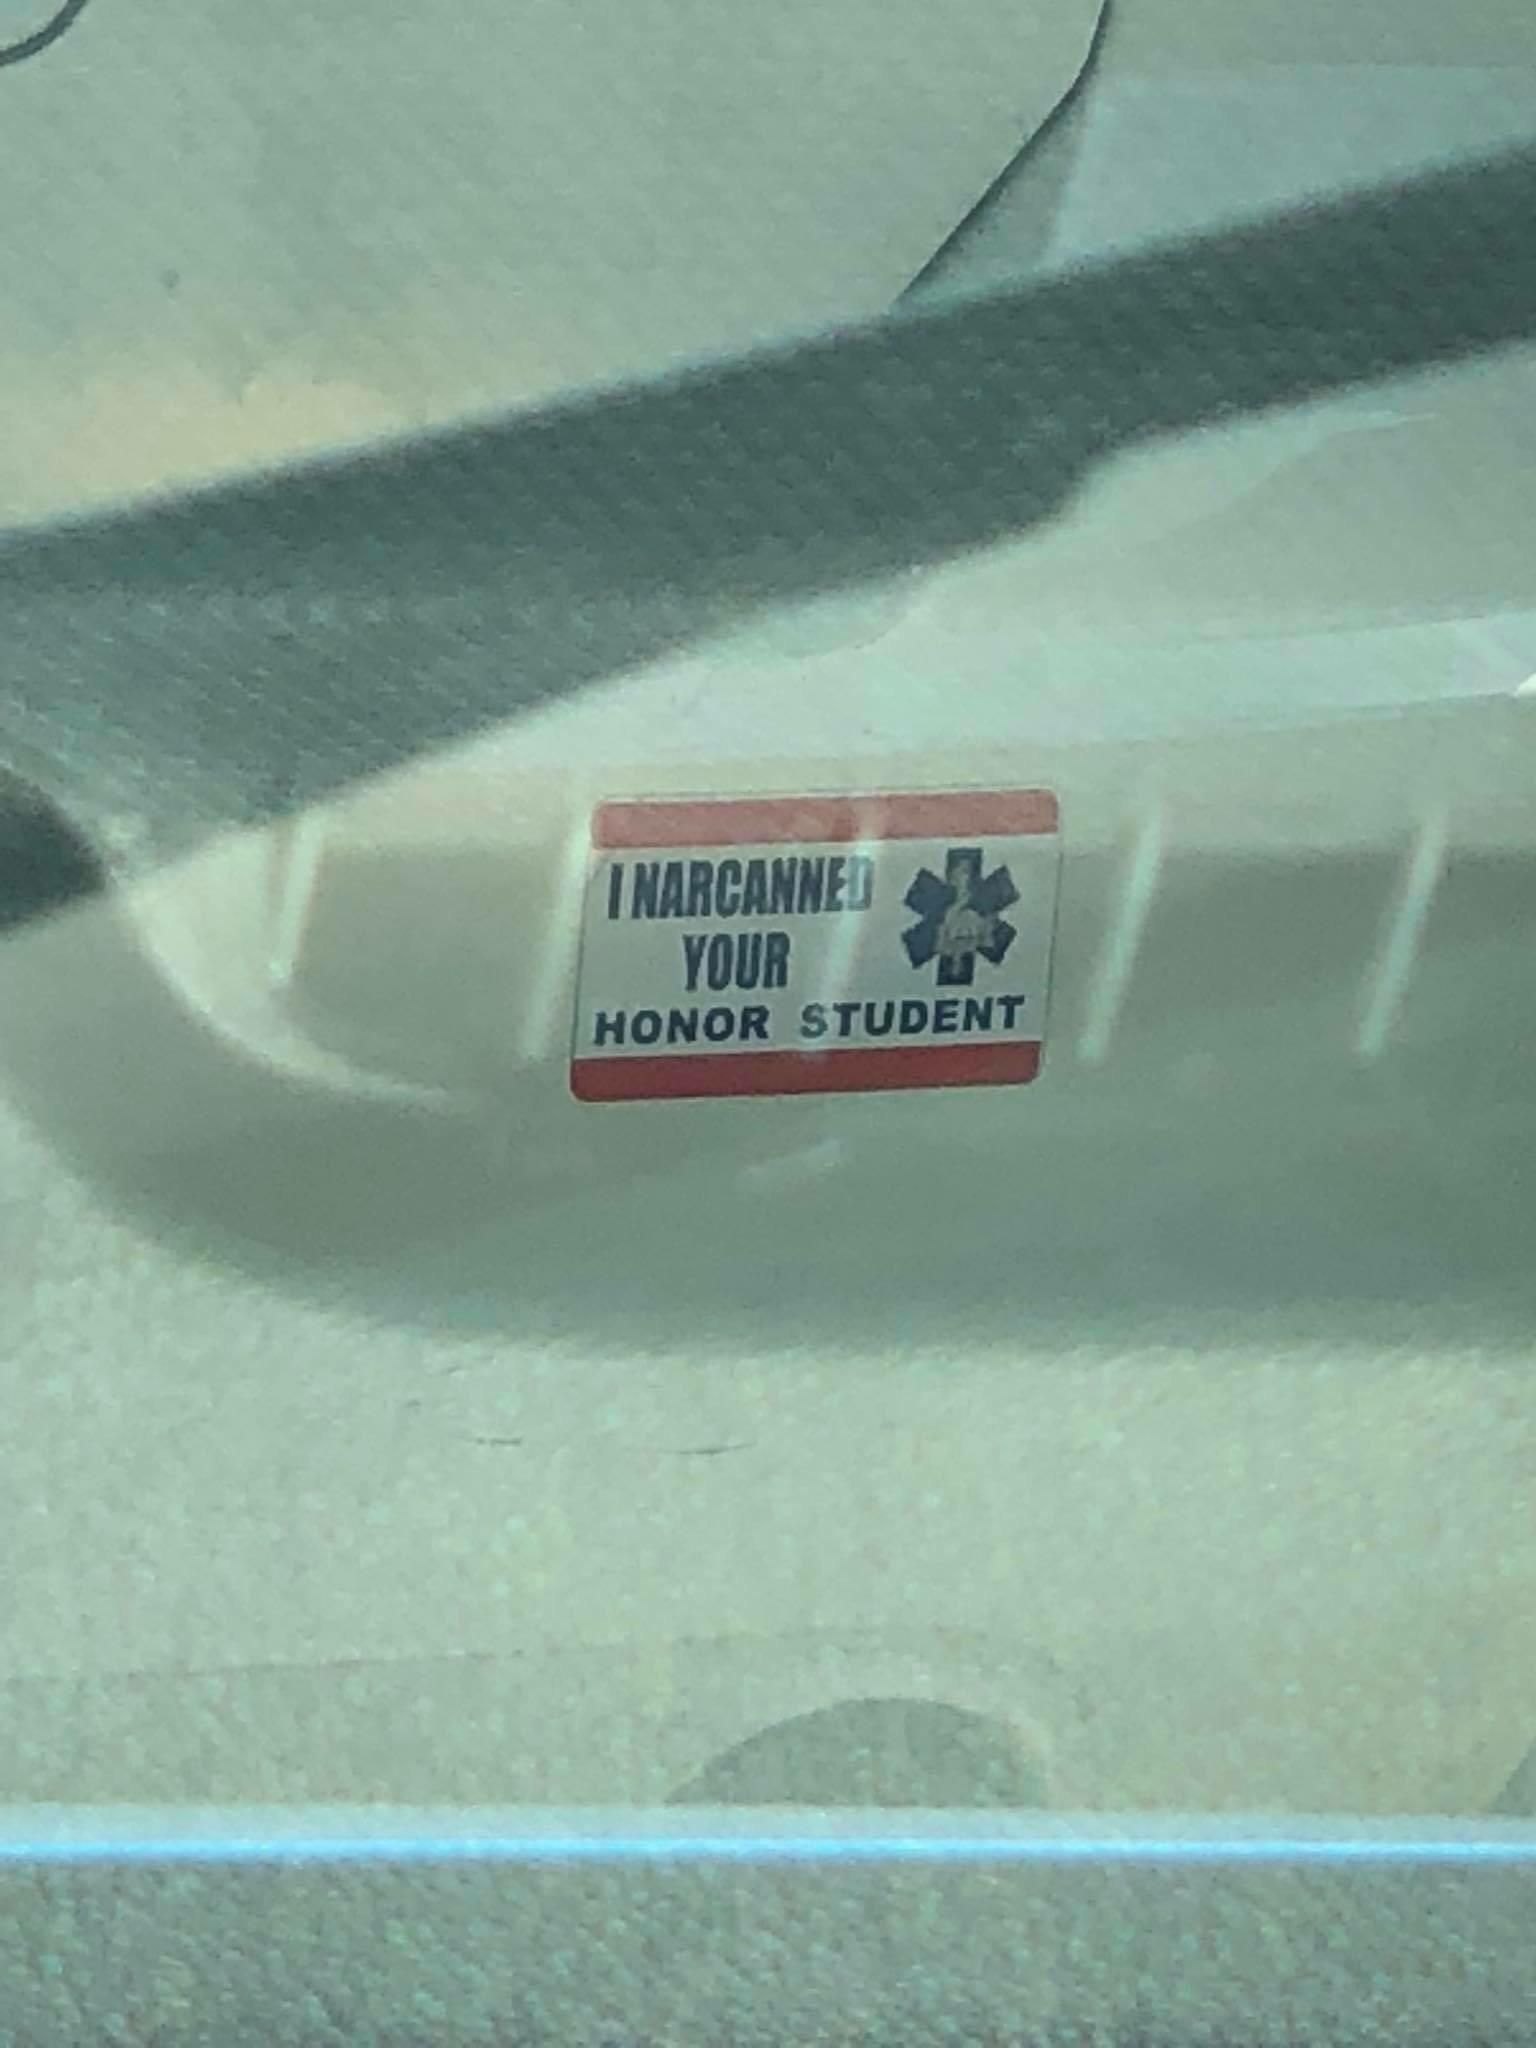 Saw this bumper sticker today.